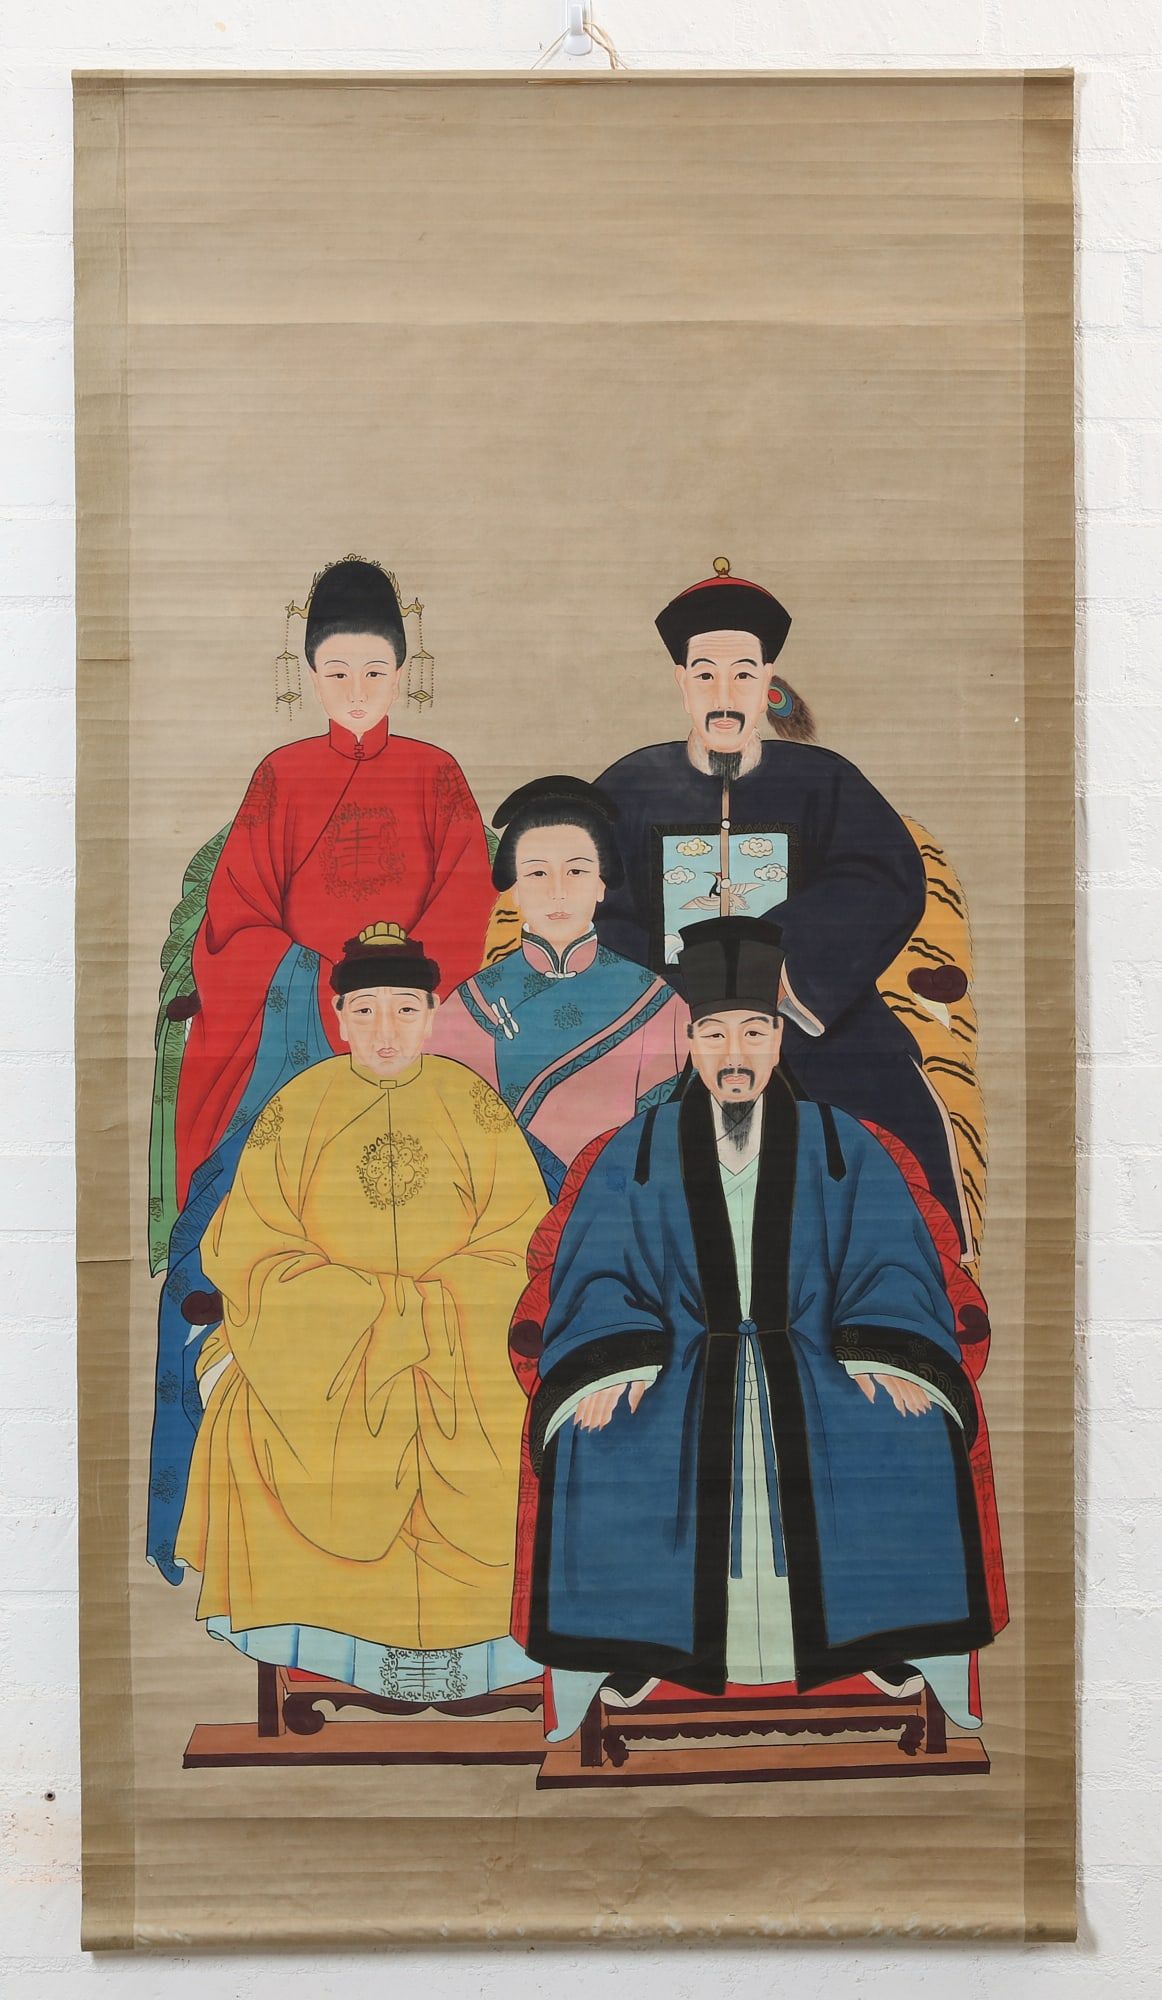 A CHINESE GROUP ANCESTOR PORTRAIT 2fb2abf